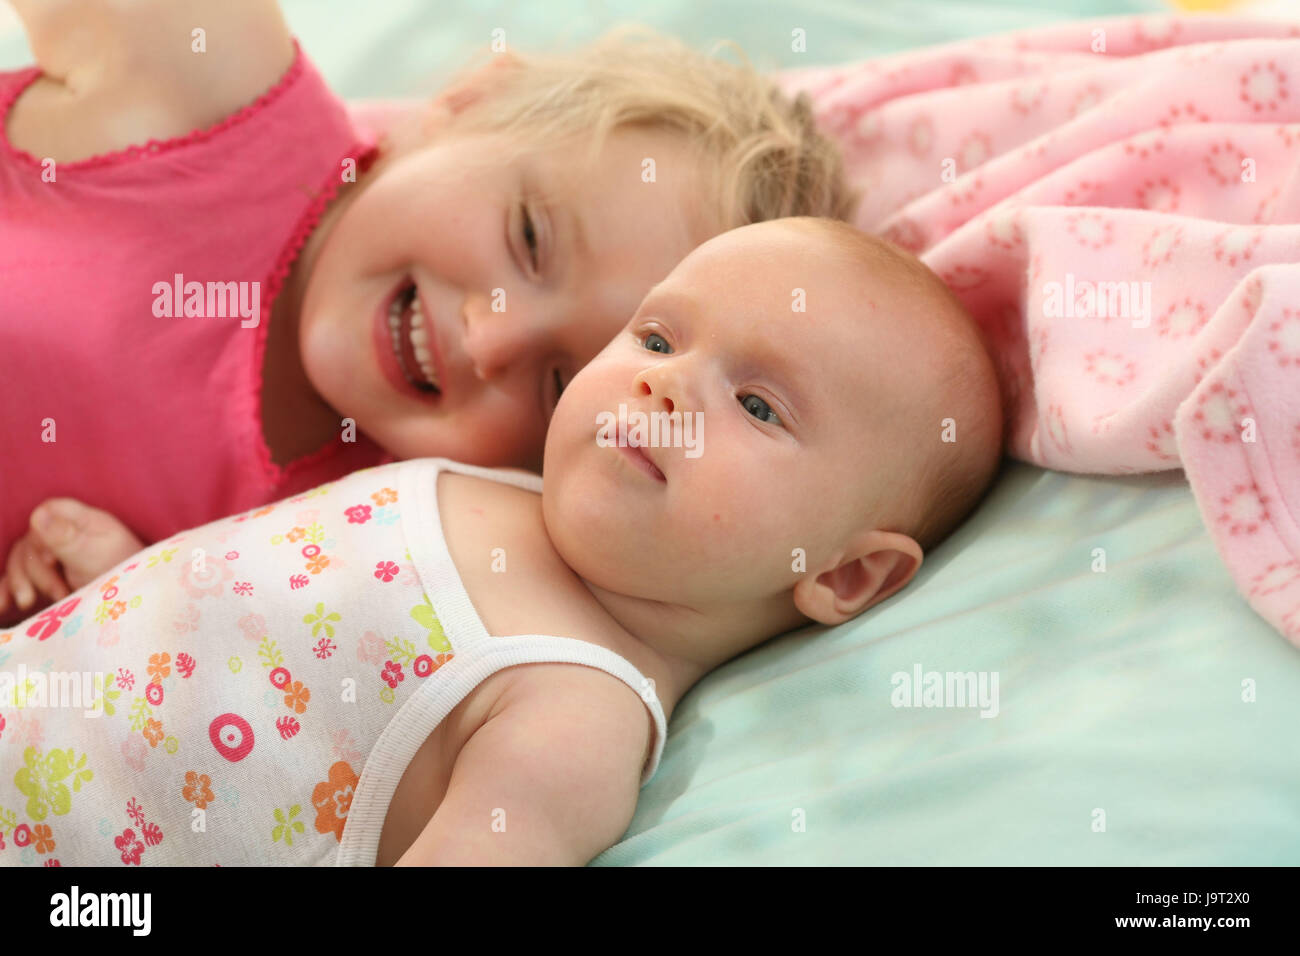 Siblings,girls,baby,cuddle,portrait, Stock Photo